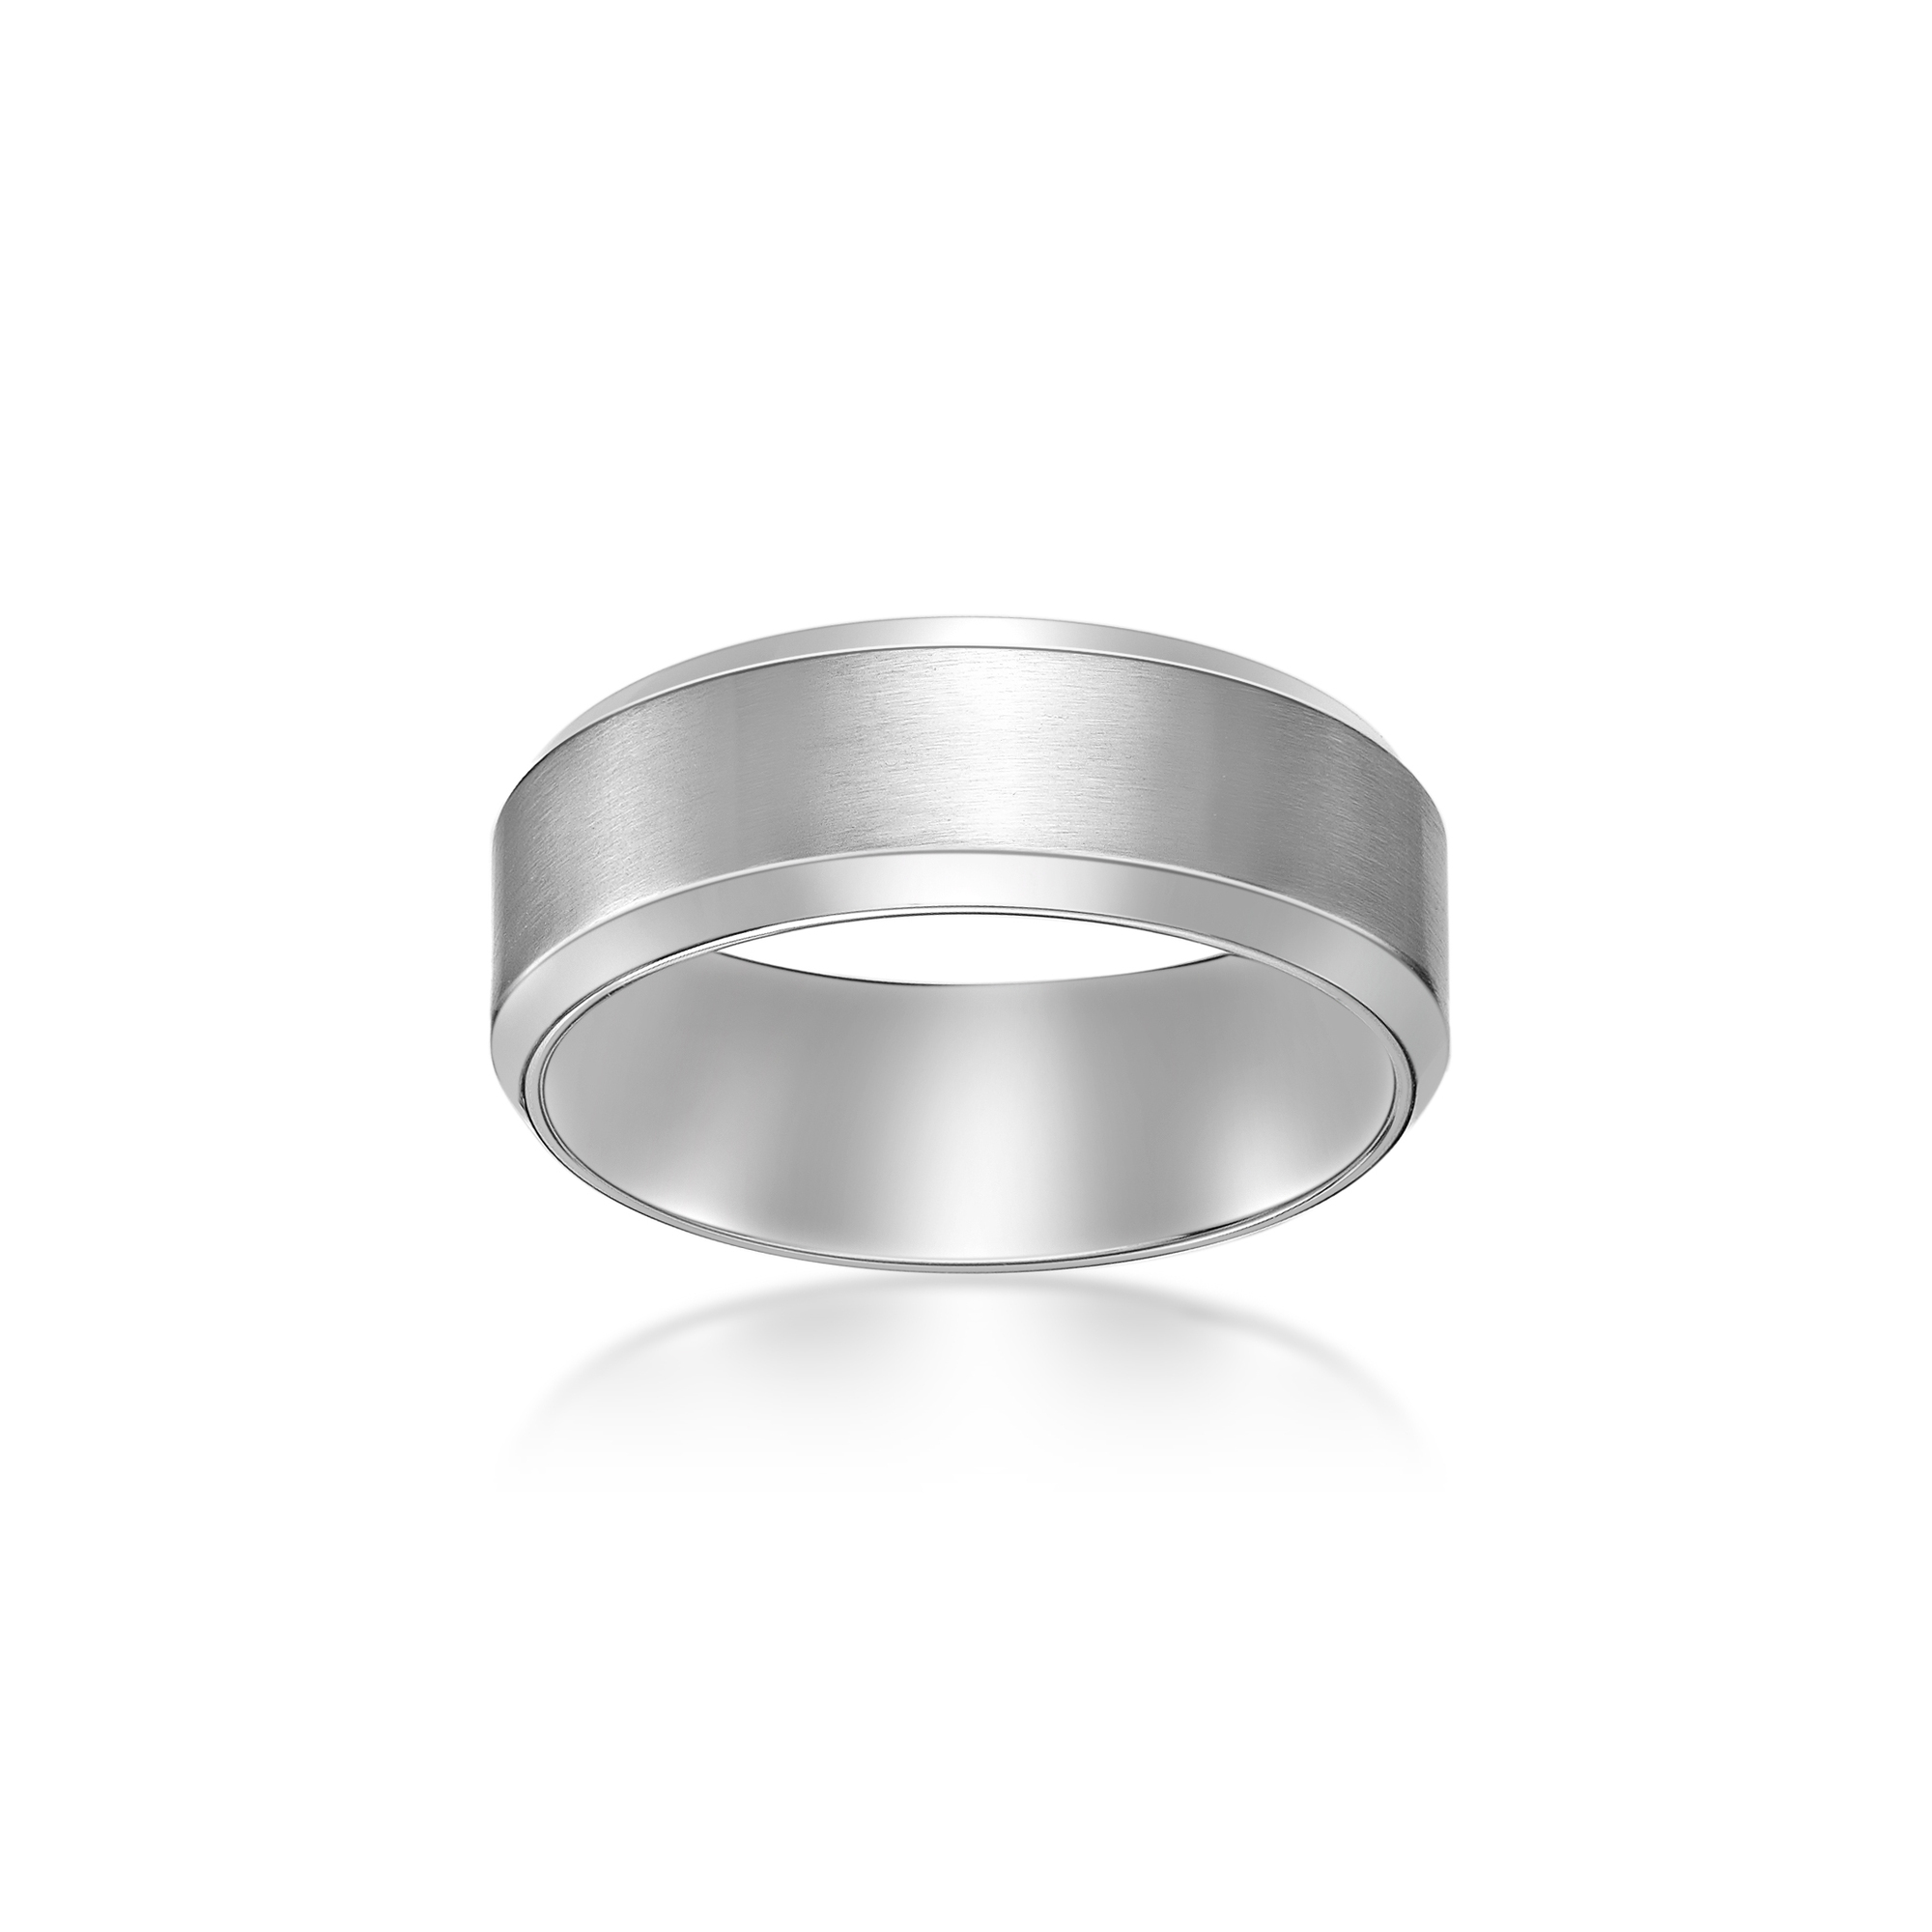 51878-ring-mens-collection-stainless-steel-.jpg